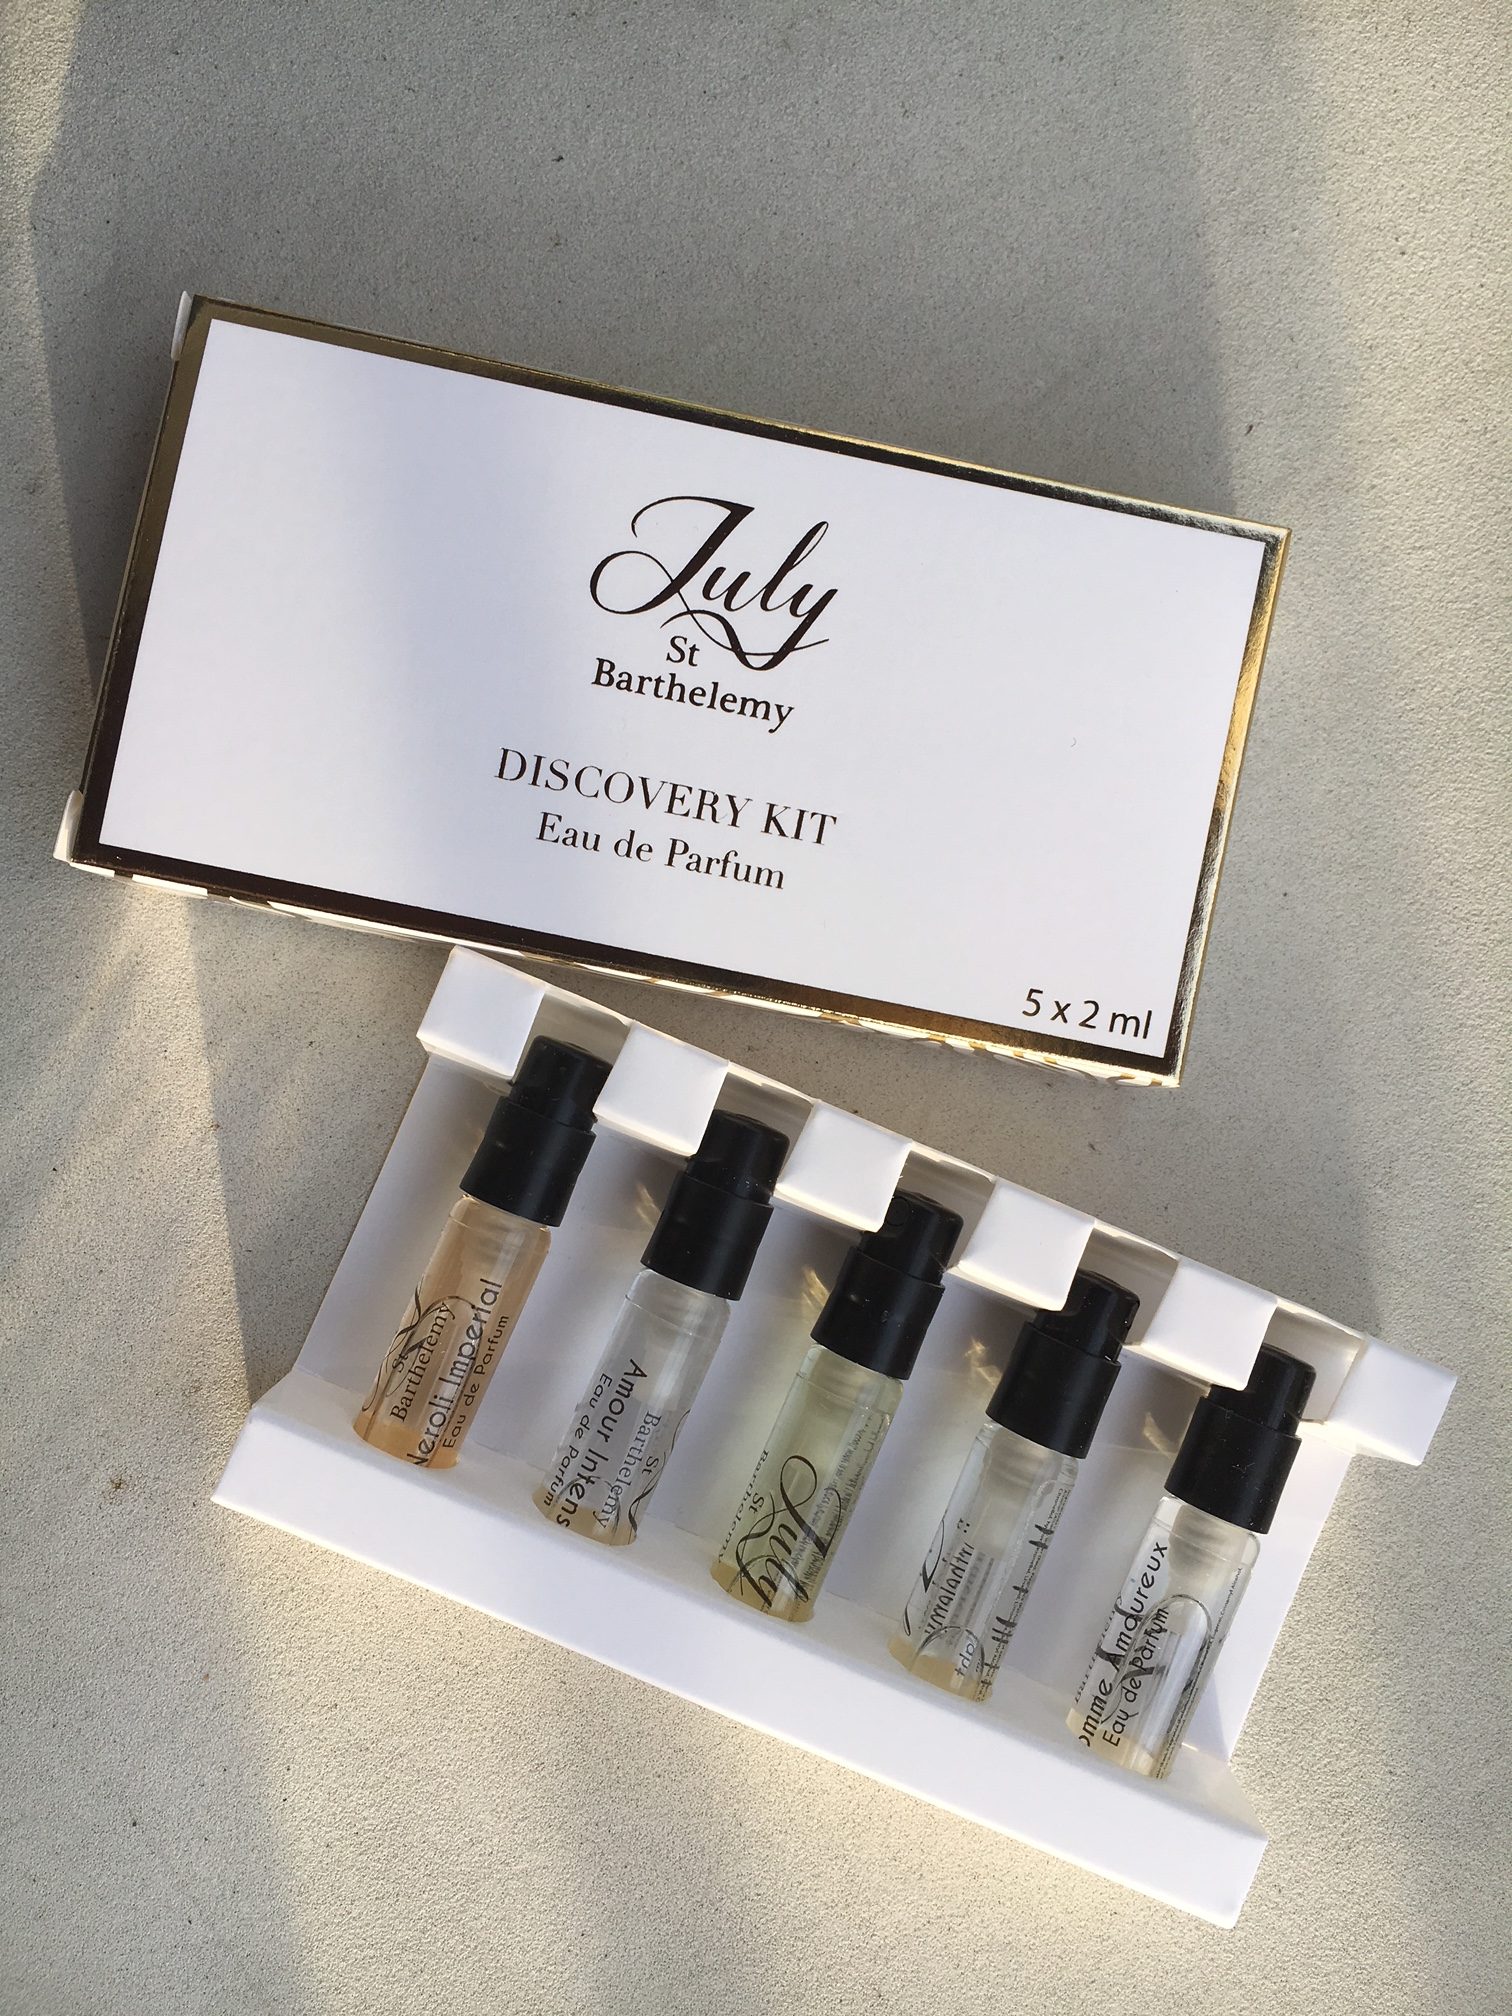 Exclusive JULY ST BARTHELEMY DISCOVERY SET